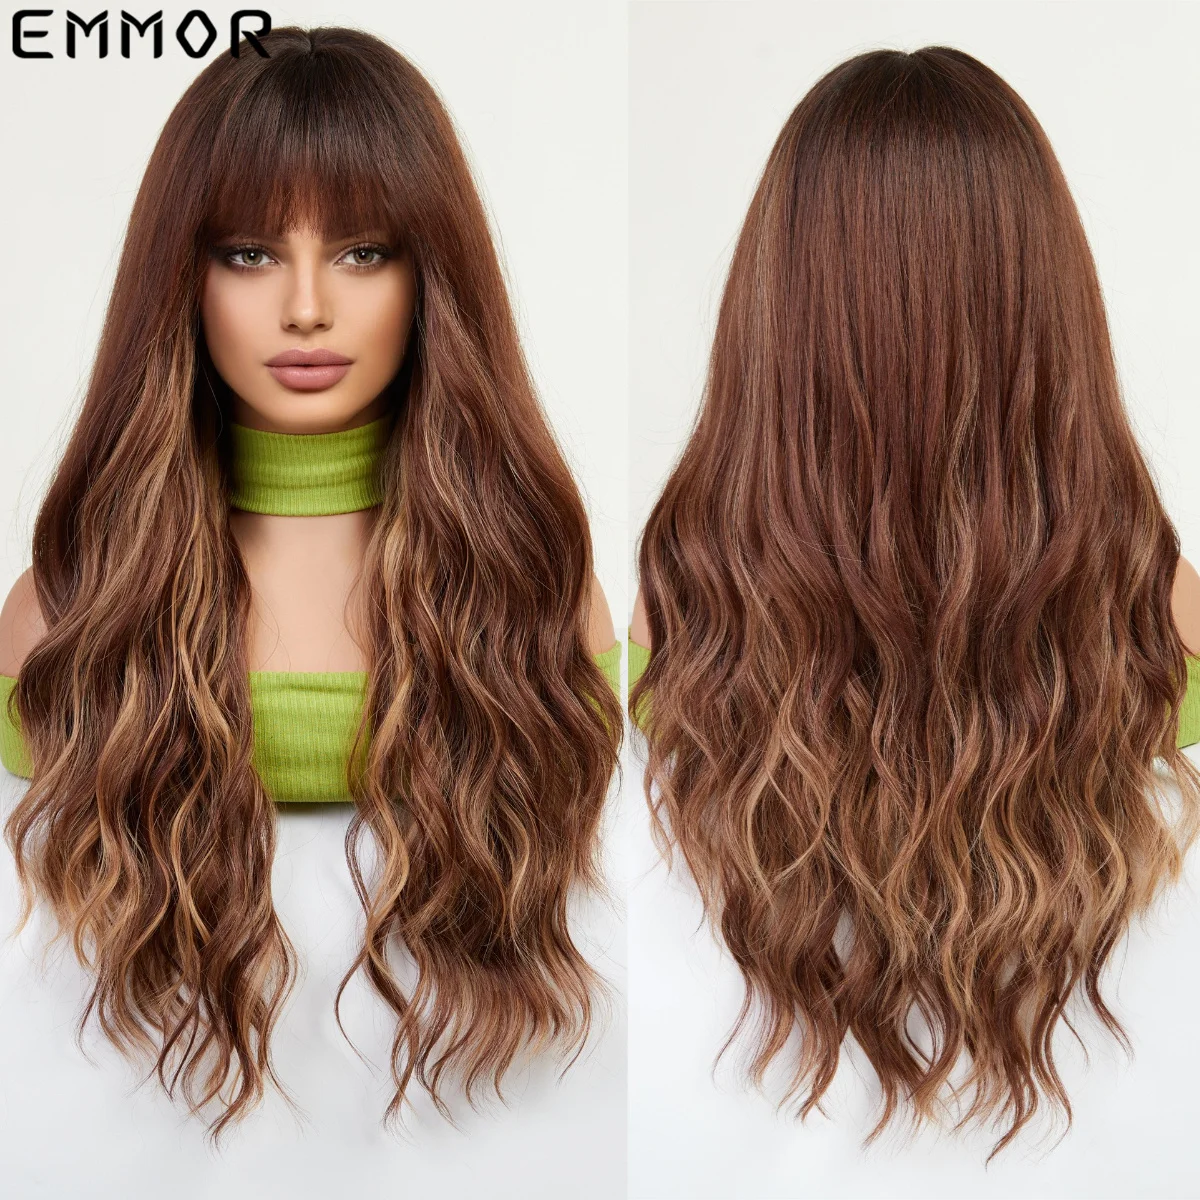 Emmor Brown Long Wave Wigs with Bangs for Women High Quality Synthetic Wig Cosplay Party Natural Heat Resistant Synthetic Hair